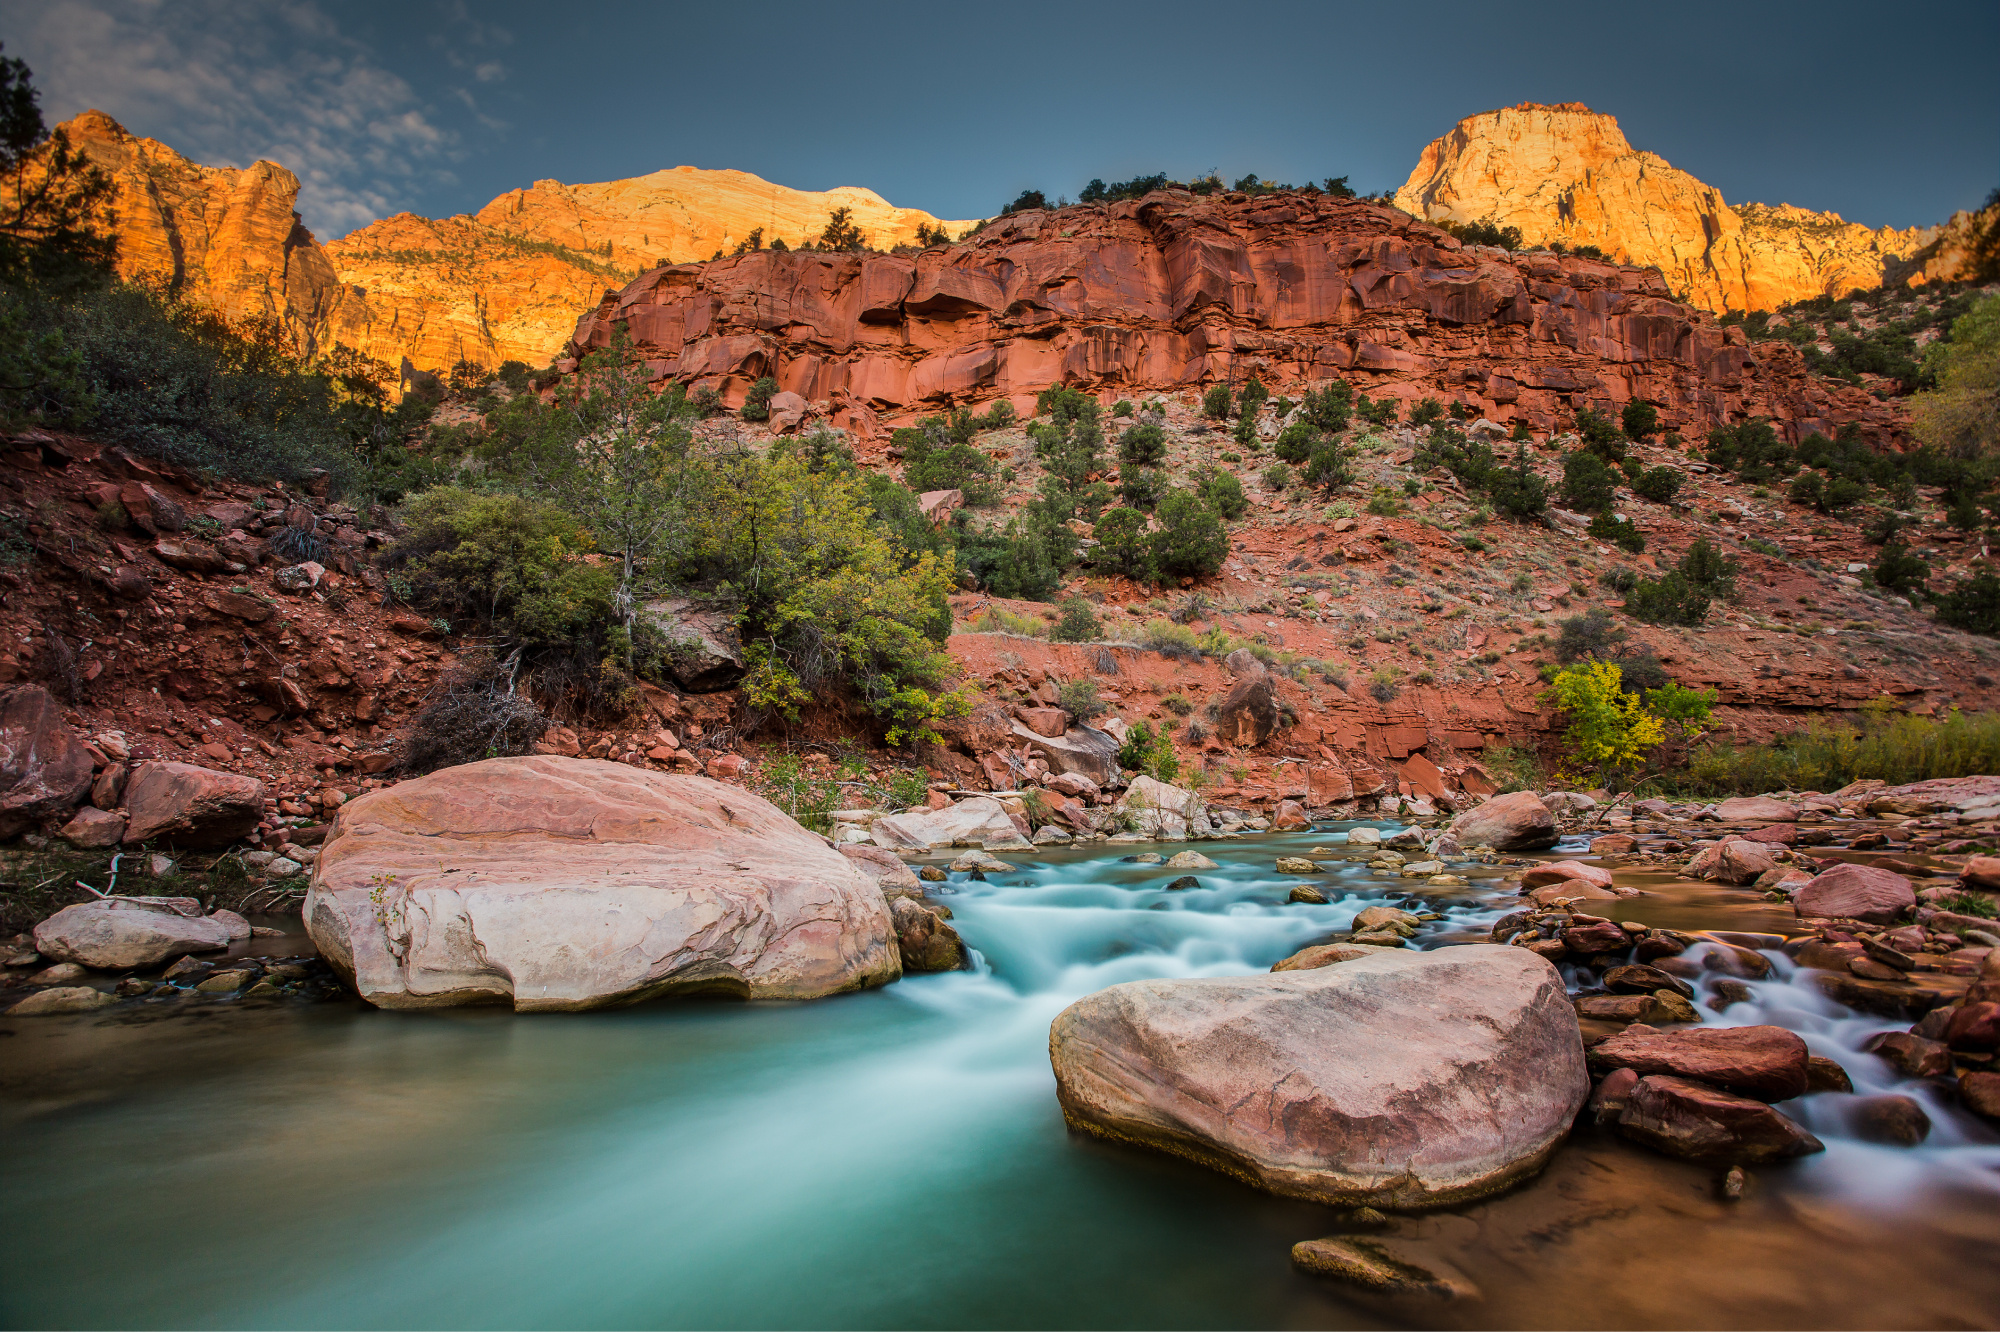 HDR Photography Workshop: Zion River HDR | Pt.5 | RAW Processing and Photoshop Import